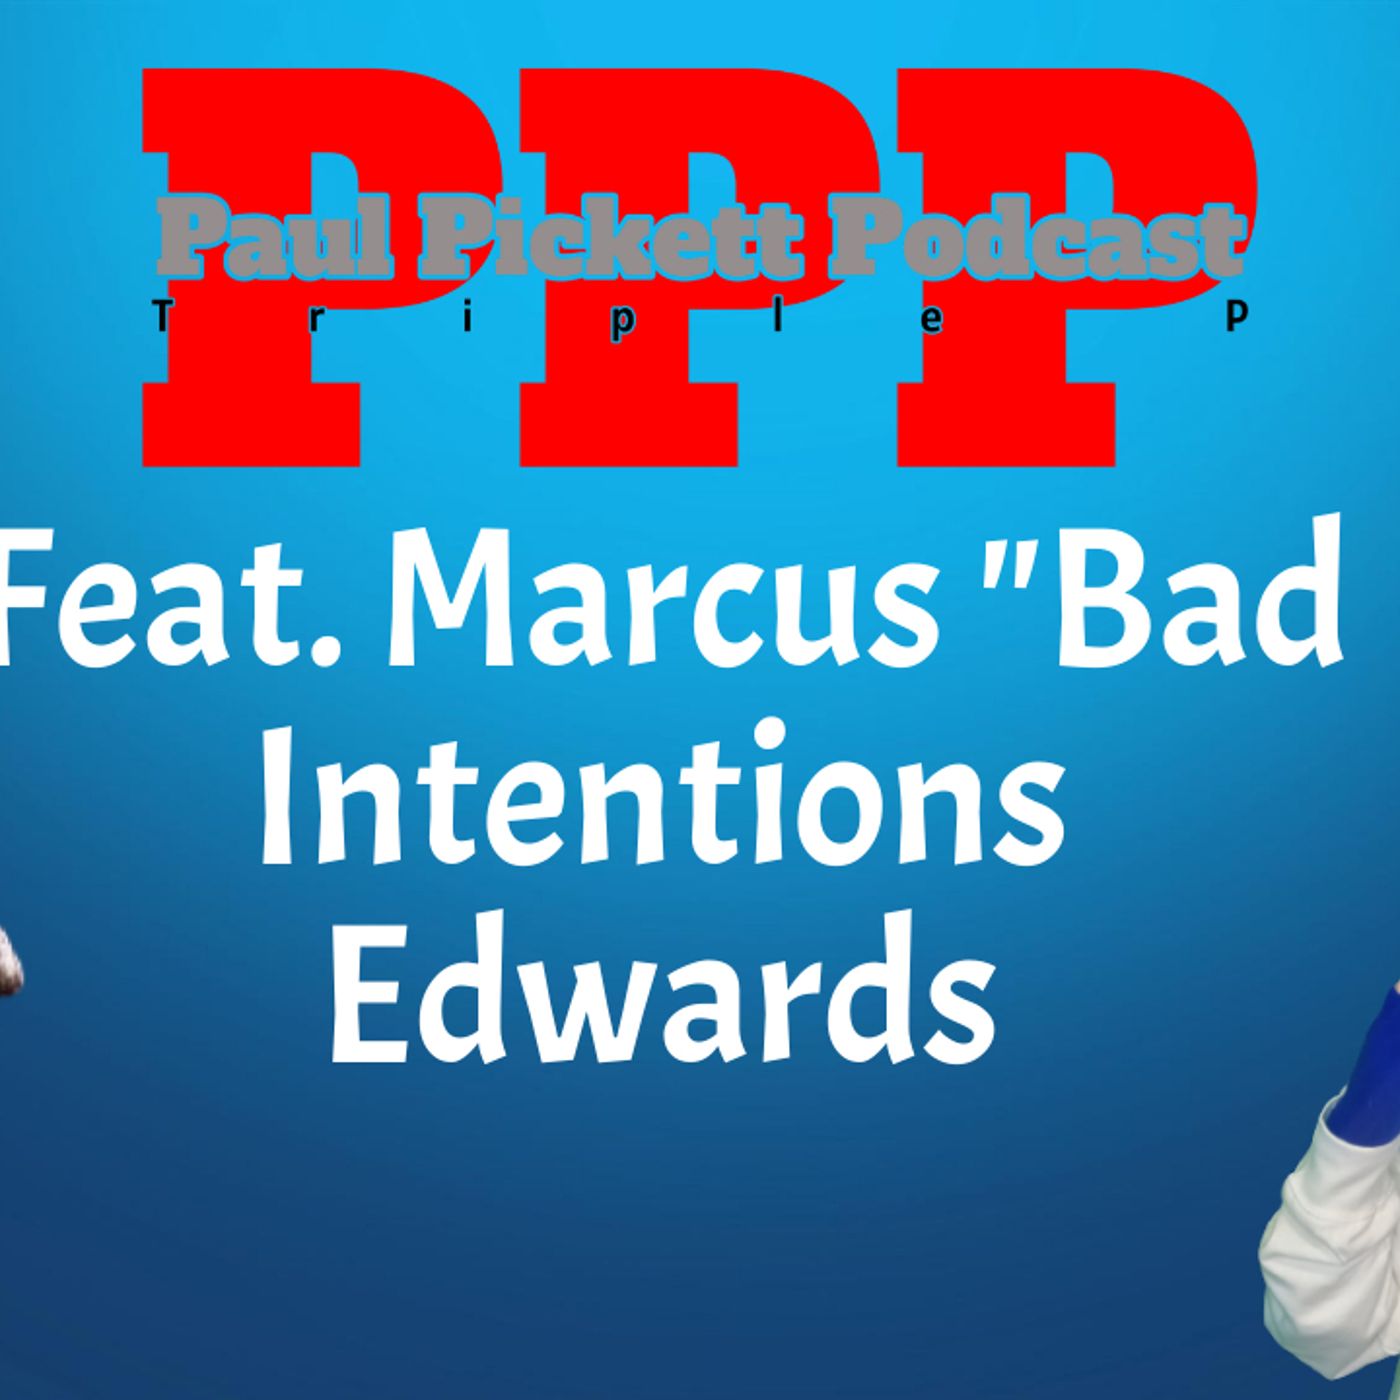 598: Marcus Bad Intentions Edwards Talks BKFC and Fighting in MMA